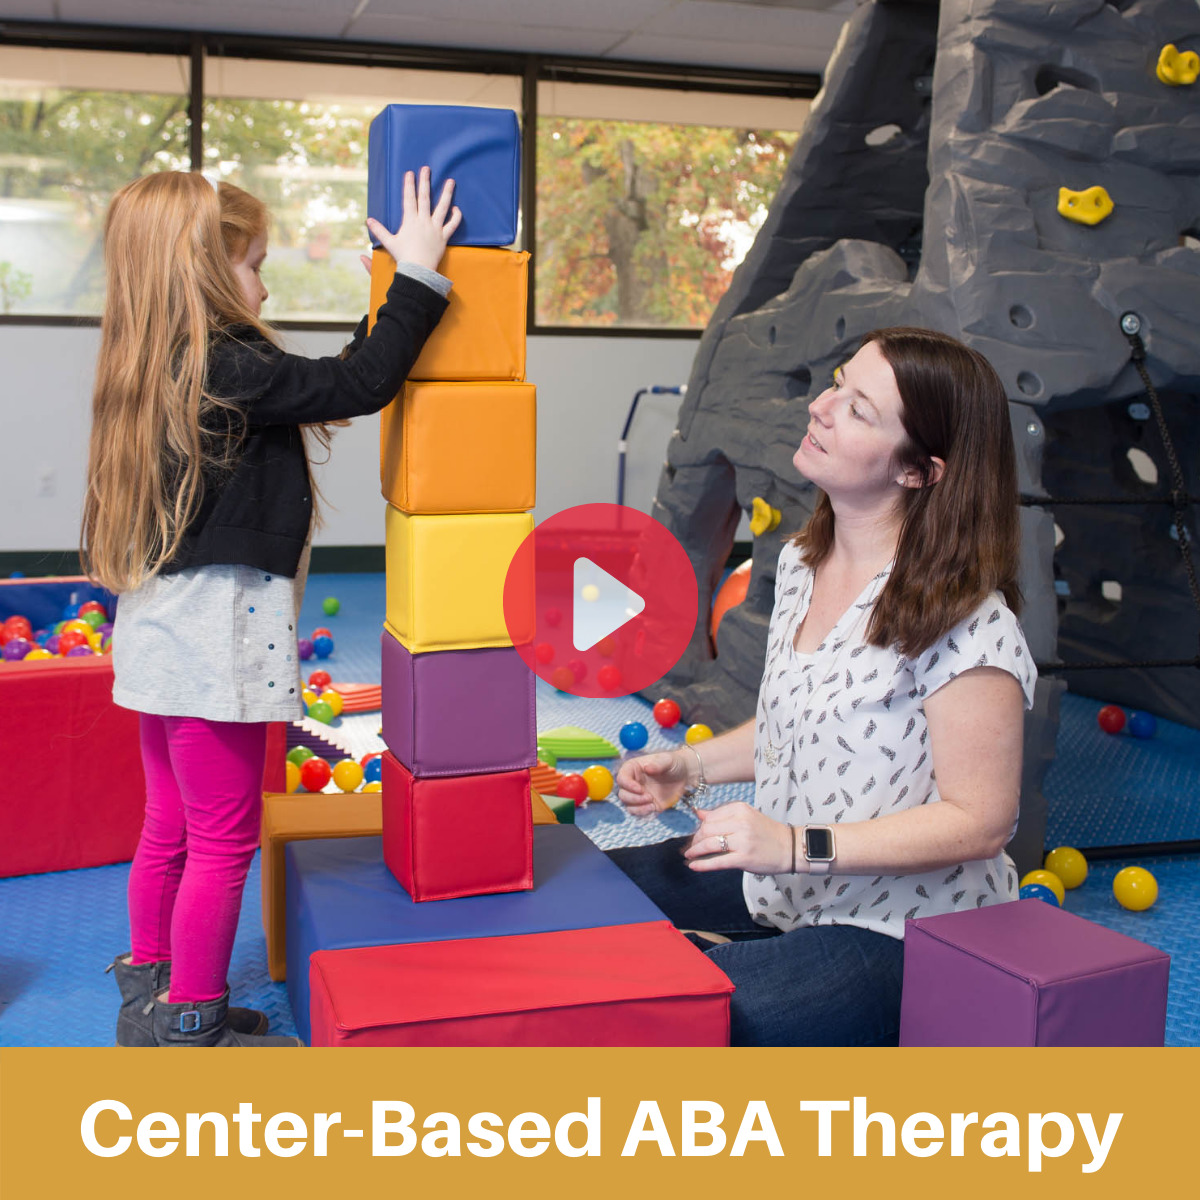 Center-Based ABA Therapy Video